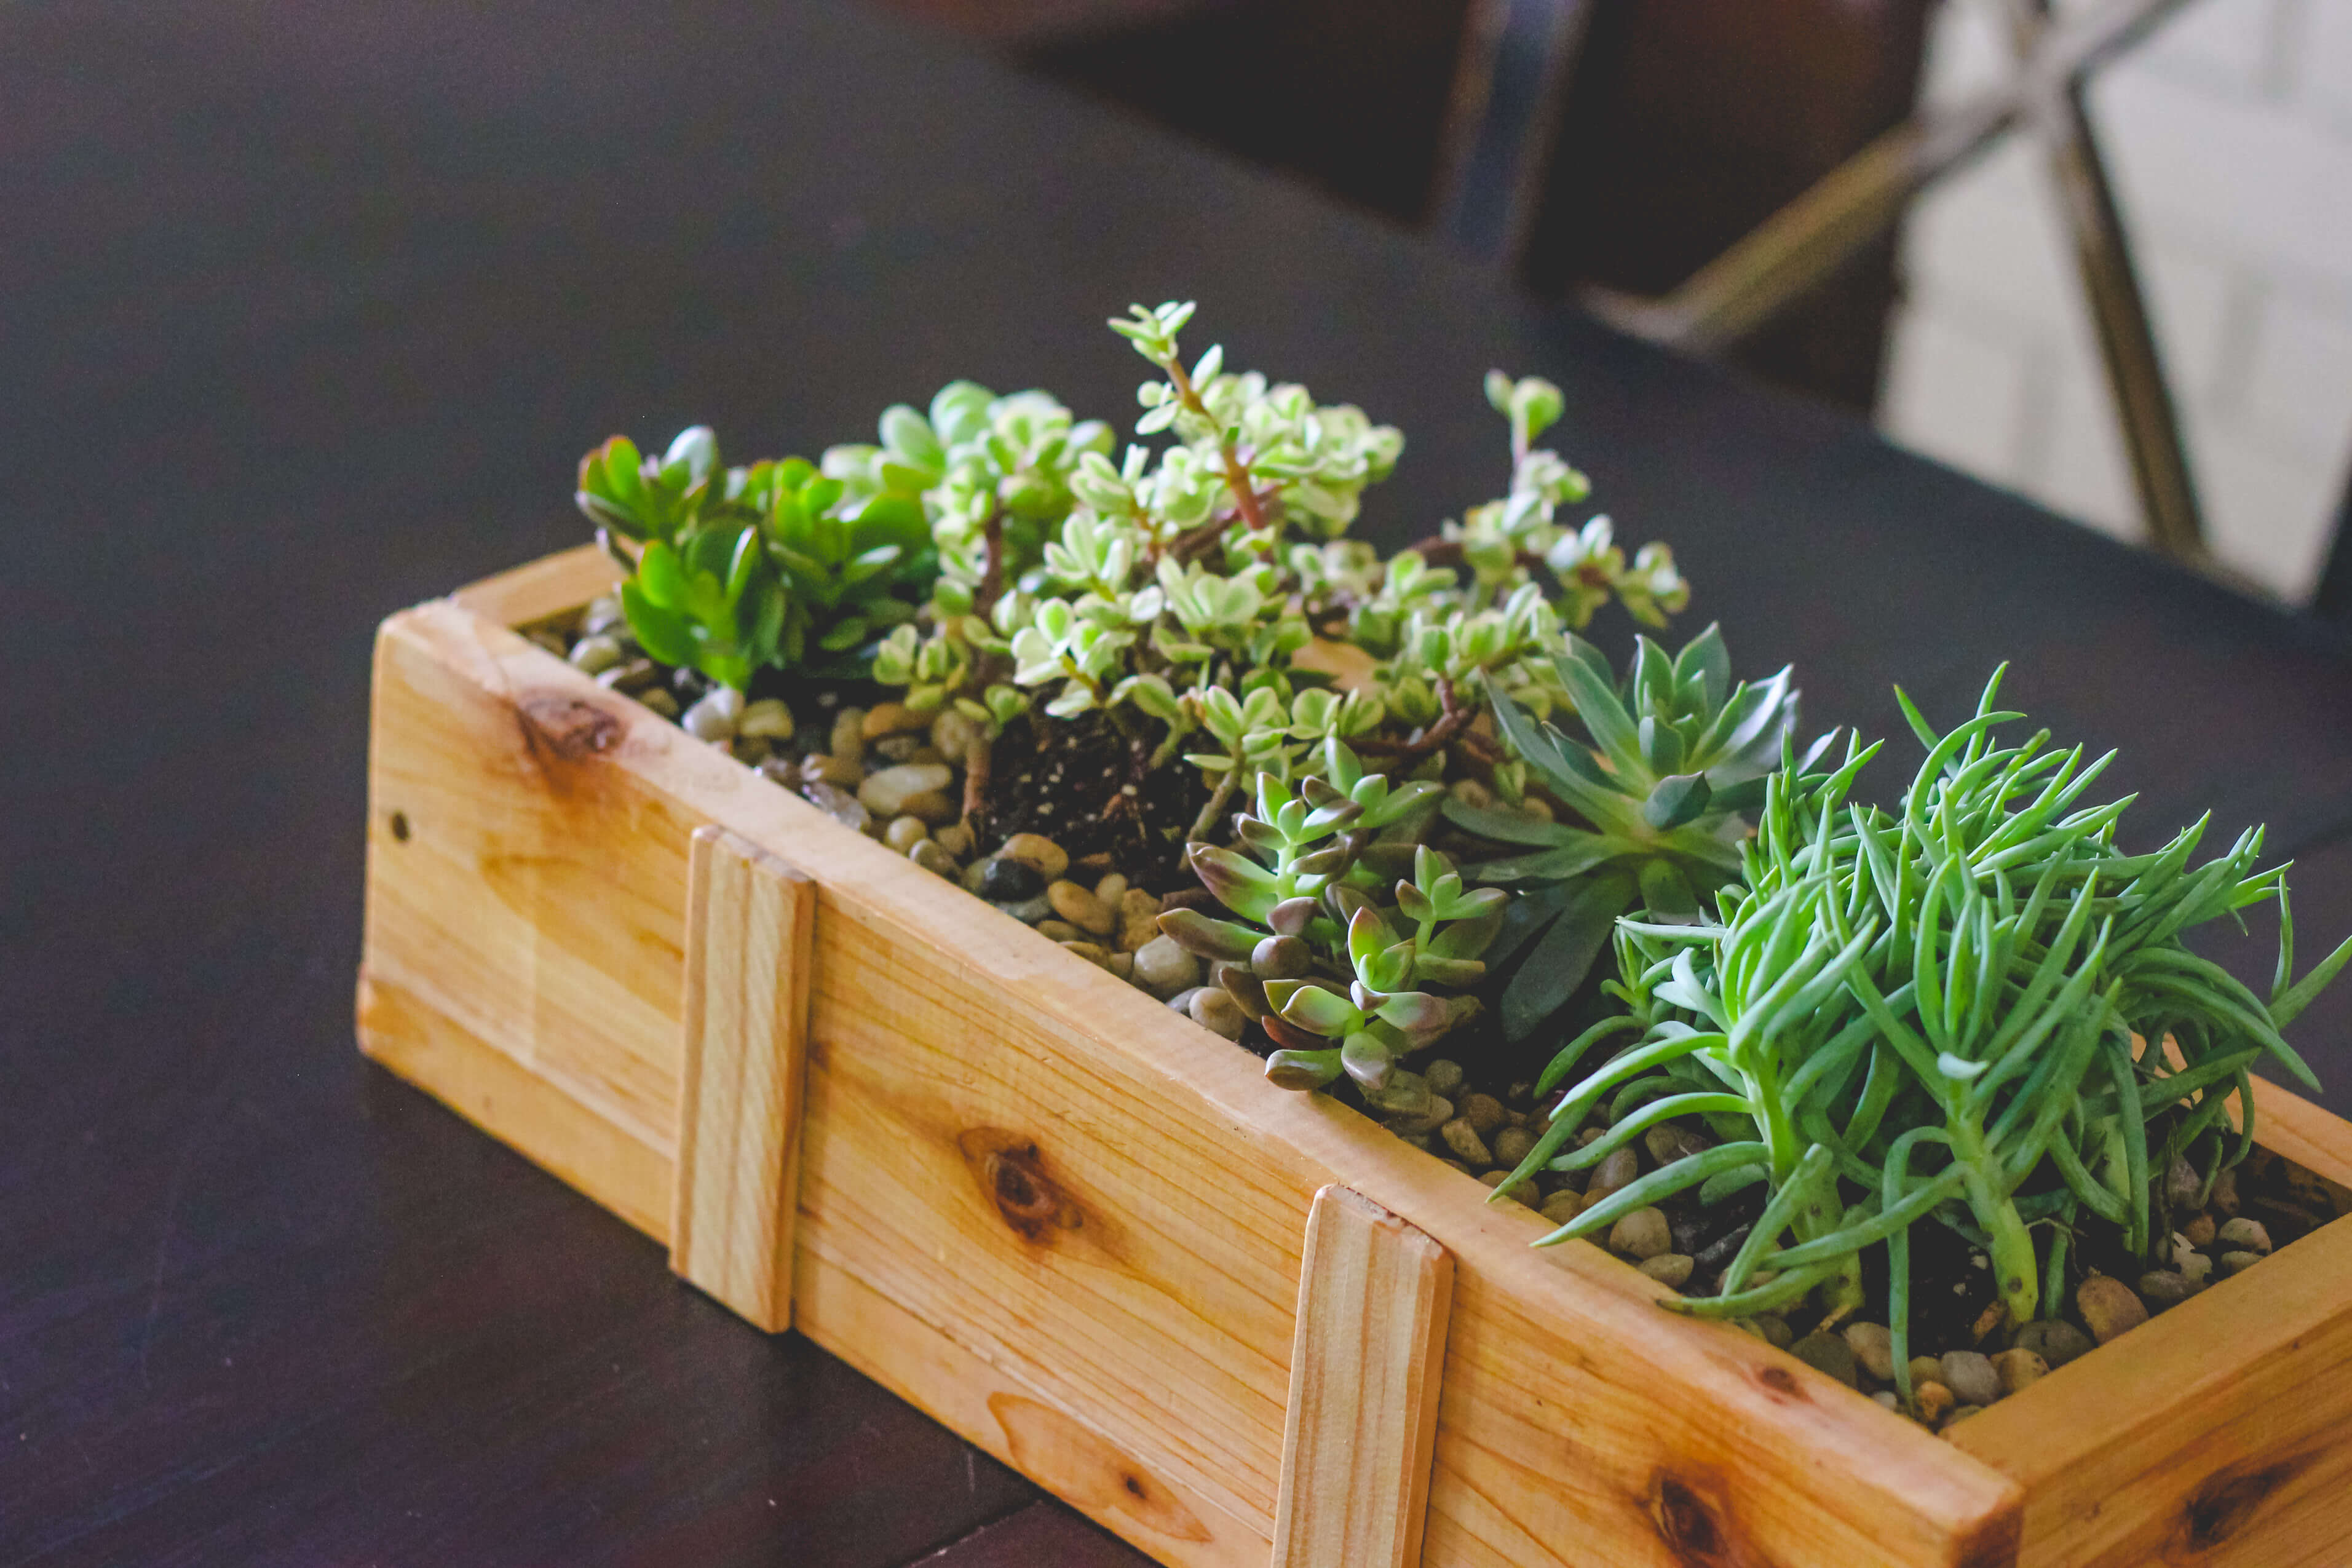 Wood pine succulent planter on table.